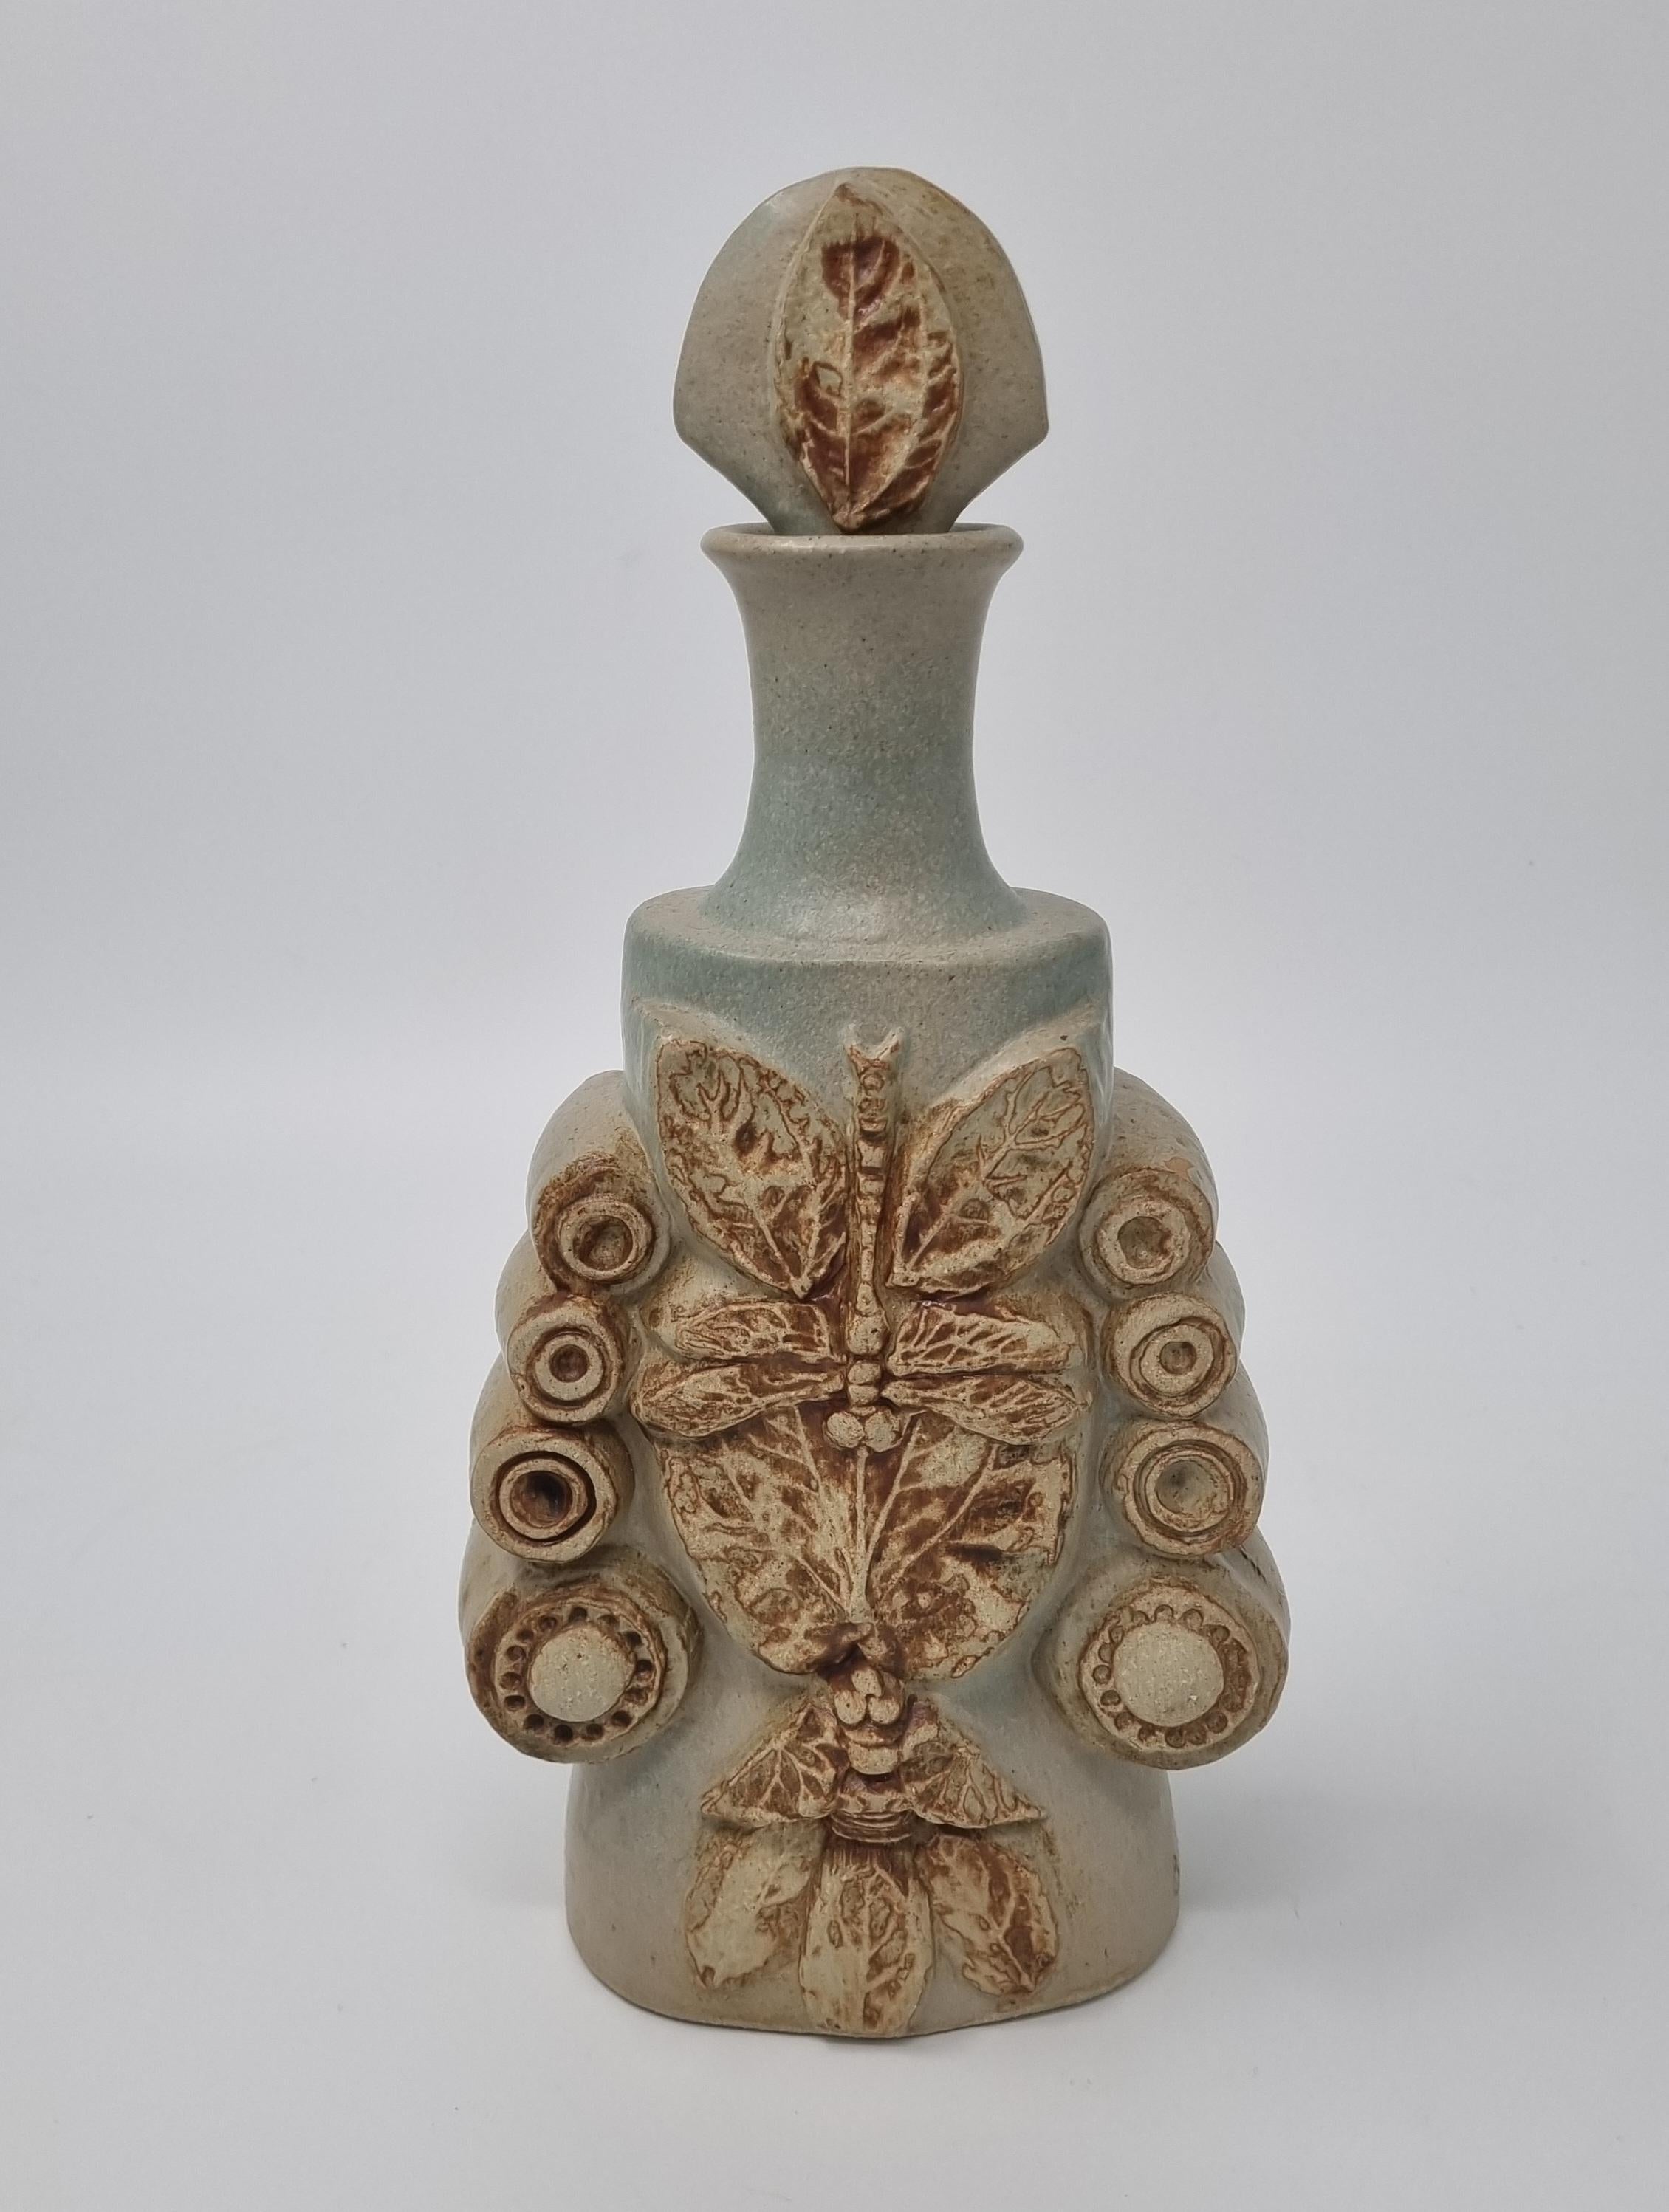 Bernard Rooke Studio Pottery Dragonfly Decanter is a beautiful example  made by the renowned British artist and potter, Bernard Rooke.

Bernard Rooke's artistic journey began at the prestigious Ipswich School of Art, where he honed his skills and